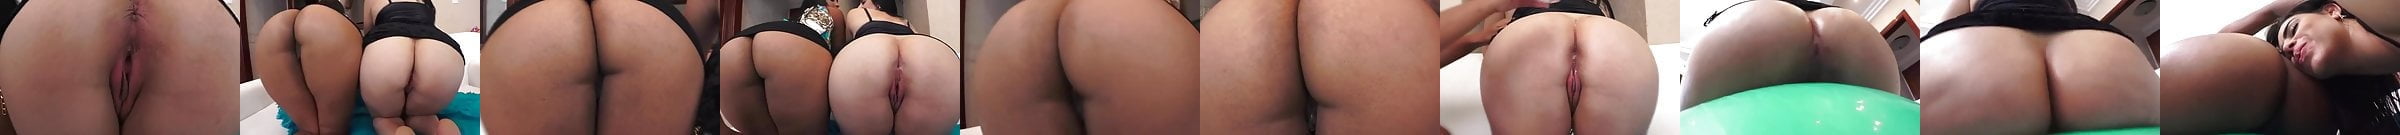 Thick White Ass Farting Free Anal Porn Video 4b XHamster XHamster